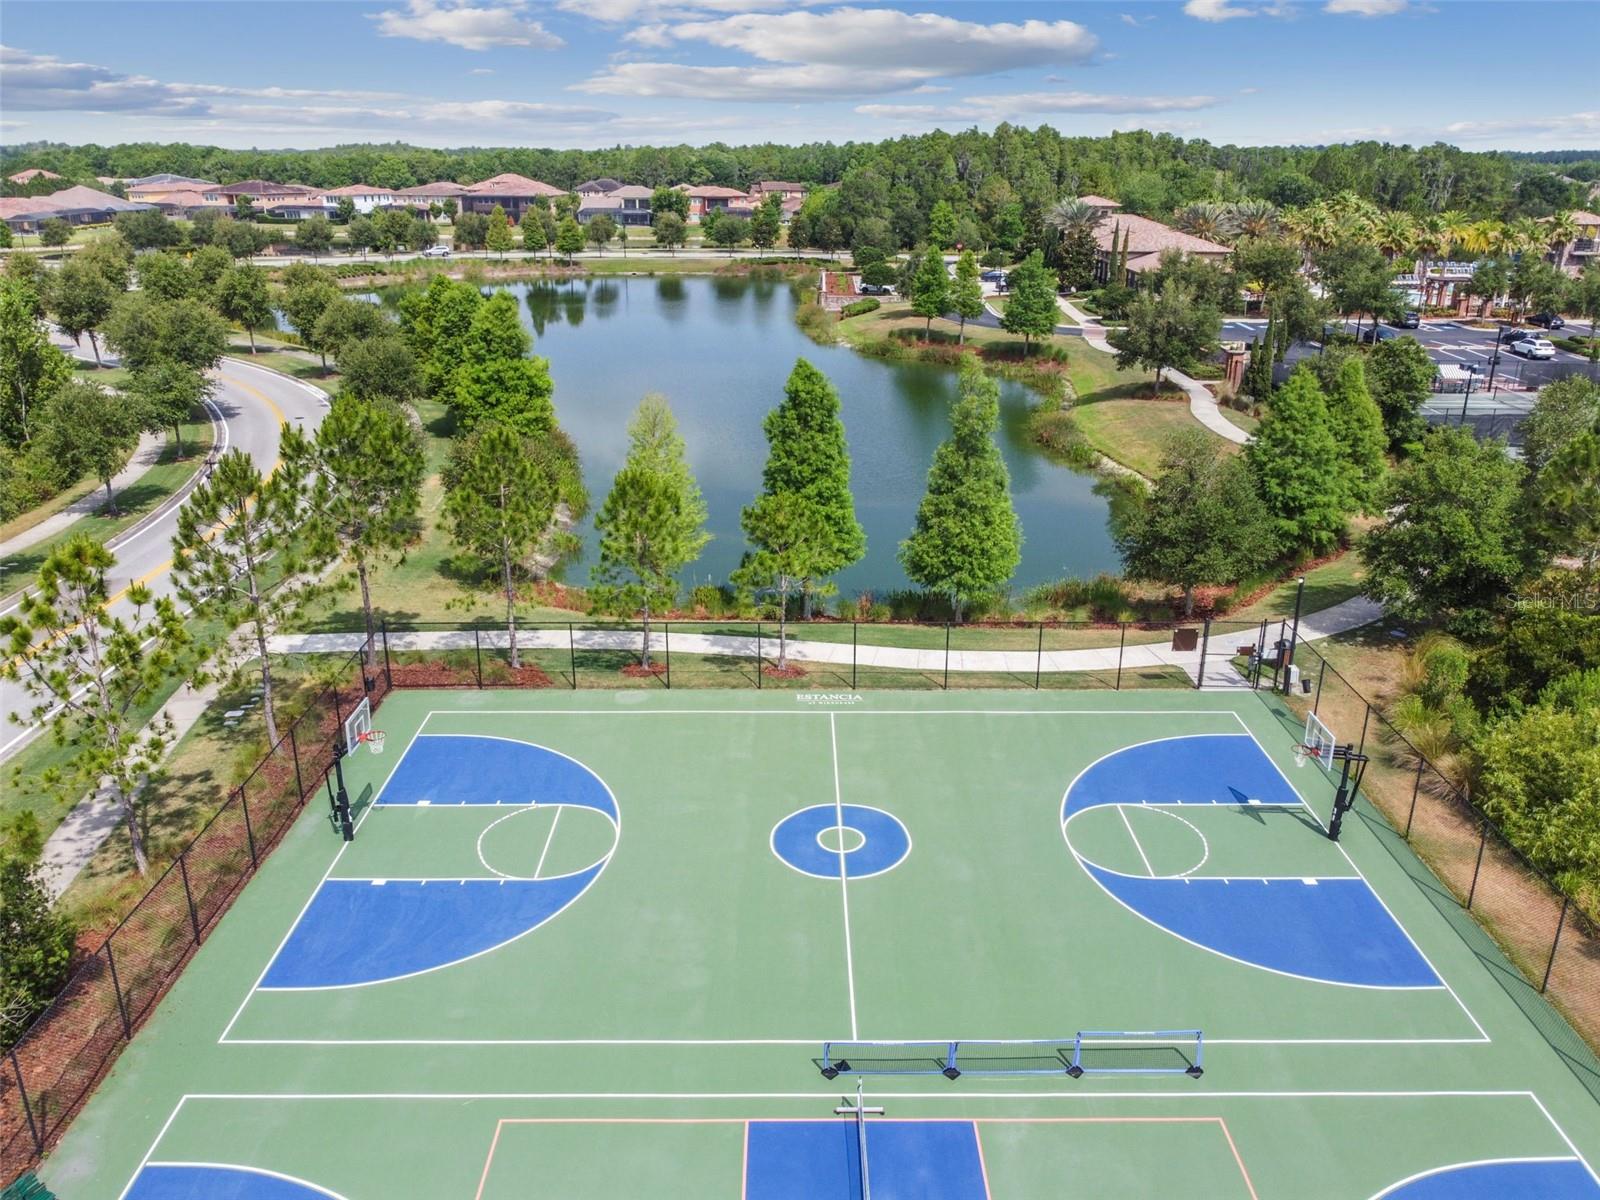 Pickell Ball and Basketball Courts